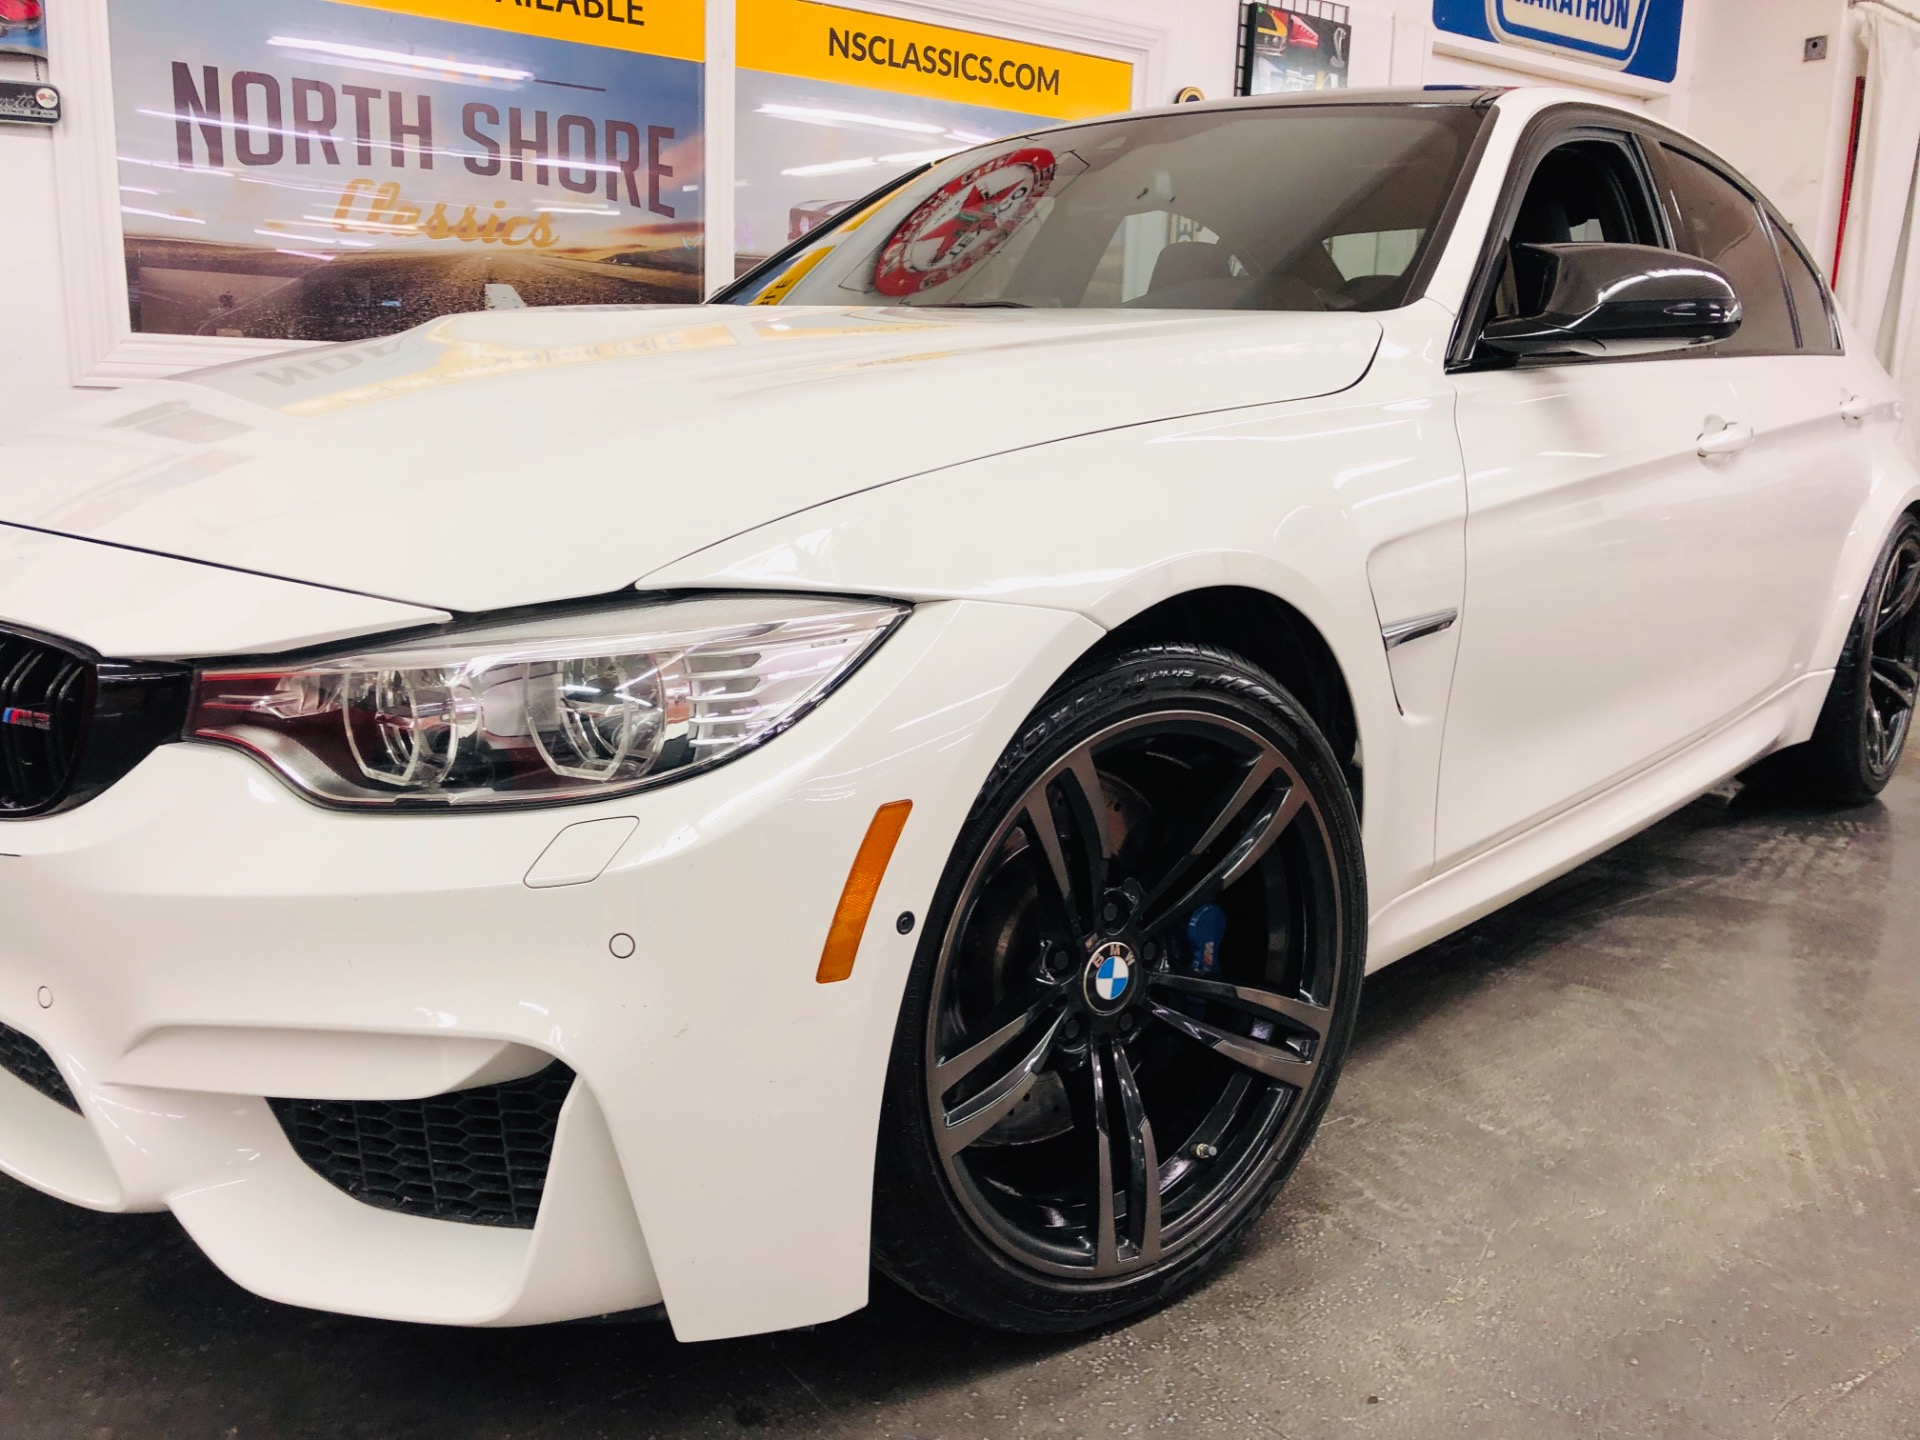 Used 2015 BMW M3 -NO HAGGLE BUY IT NOW PRICE-2 OWNER-CLEAN CARFAX-TWIN TURBO-VIDEO | Mundelein, IL